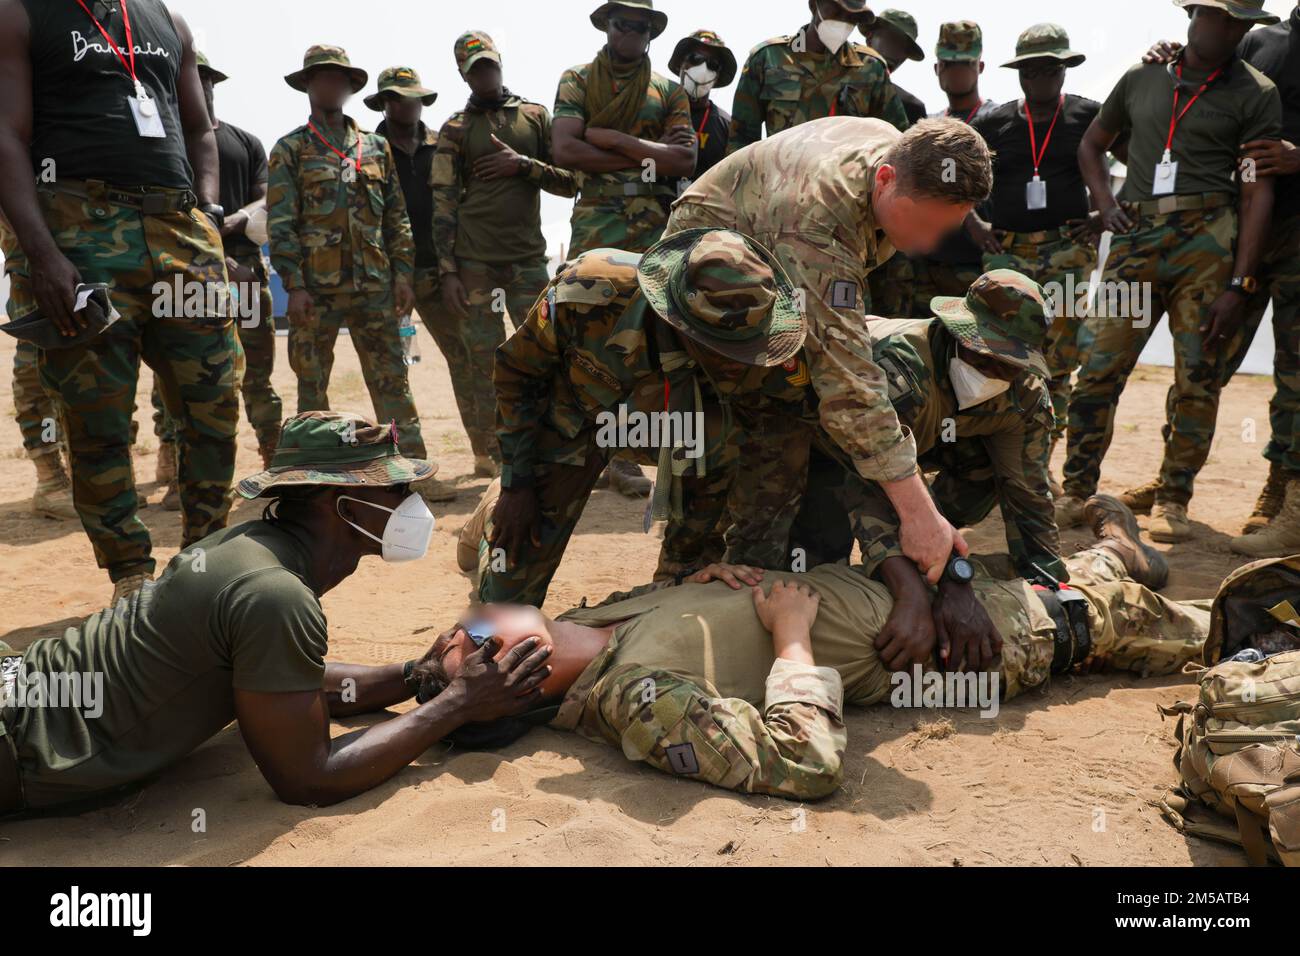 A British Armed Forces Soldier advises Ghanaian Soldiers during medical training at Exercise Flintlock, in Côte d'Ivoire on Feb. 17, 2022. Flintlock is an annual, African-led, combined military and law enforcement exercise that has strengthened key partner-nation forces throughout Africa, in partnership with international special operations forces, since 2005 Stock Photo